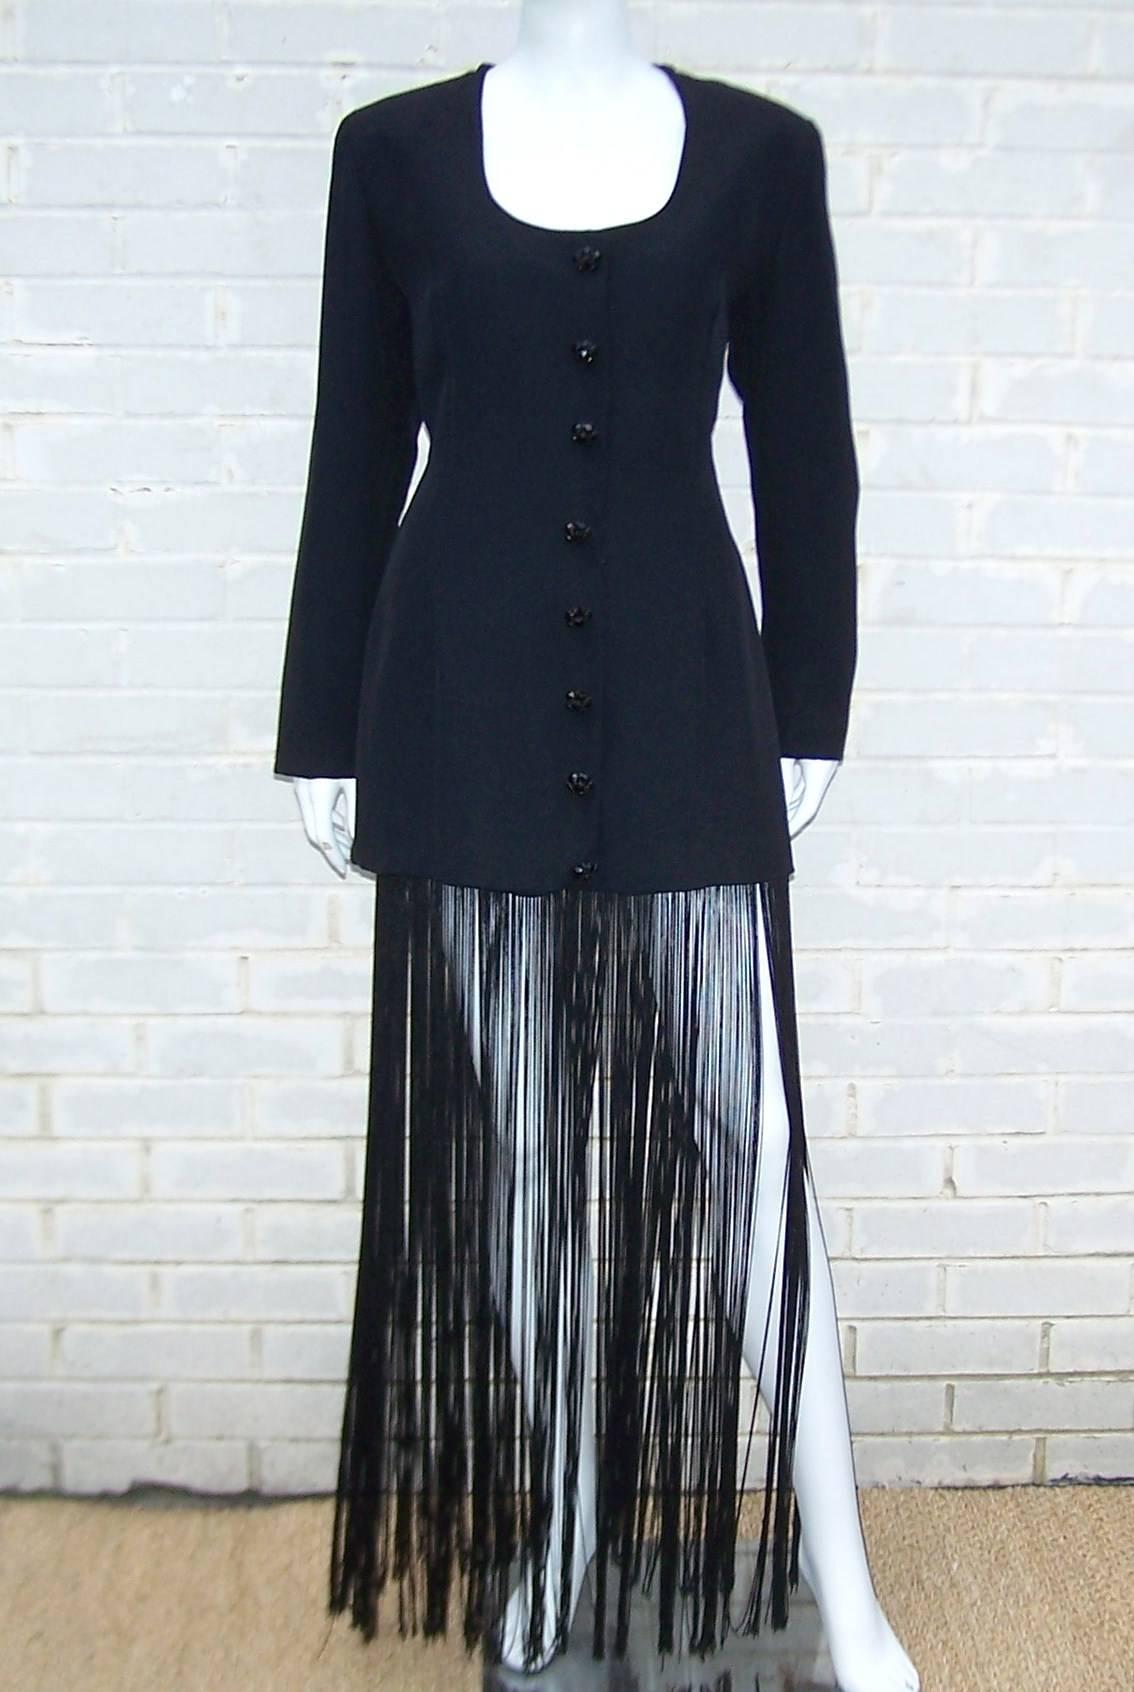 Have you ever wanted to look like a Bob Fosse dancer?!  All eyes will be on you, your gams and the seductive sway of the fringe on this black silk crepe jacket which could also be worn as a dress.  The body of the jacket is lined with scoop neck and